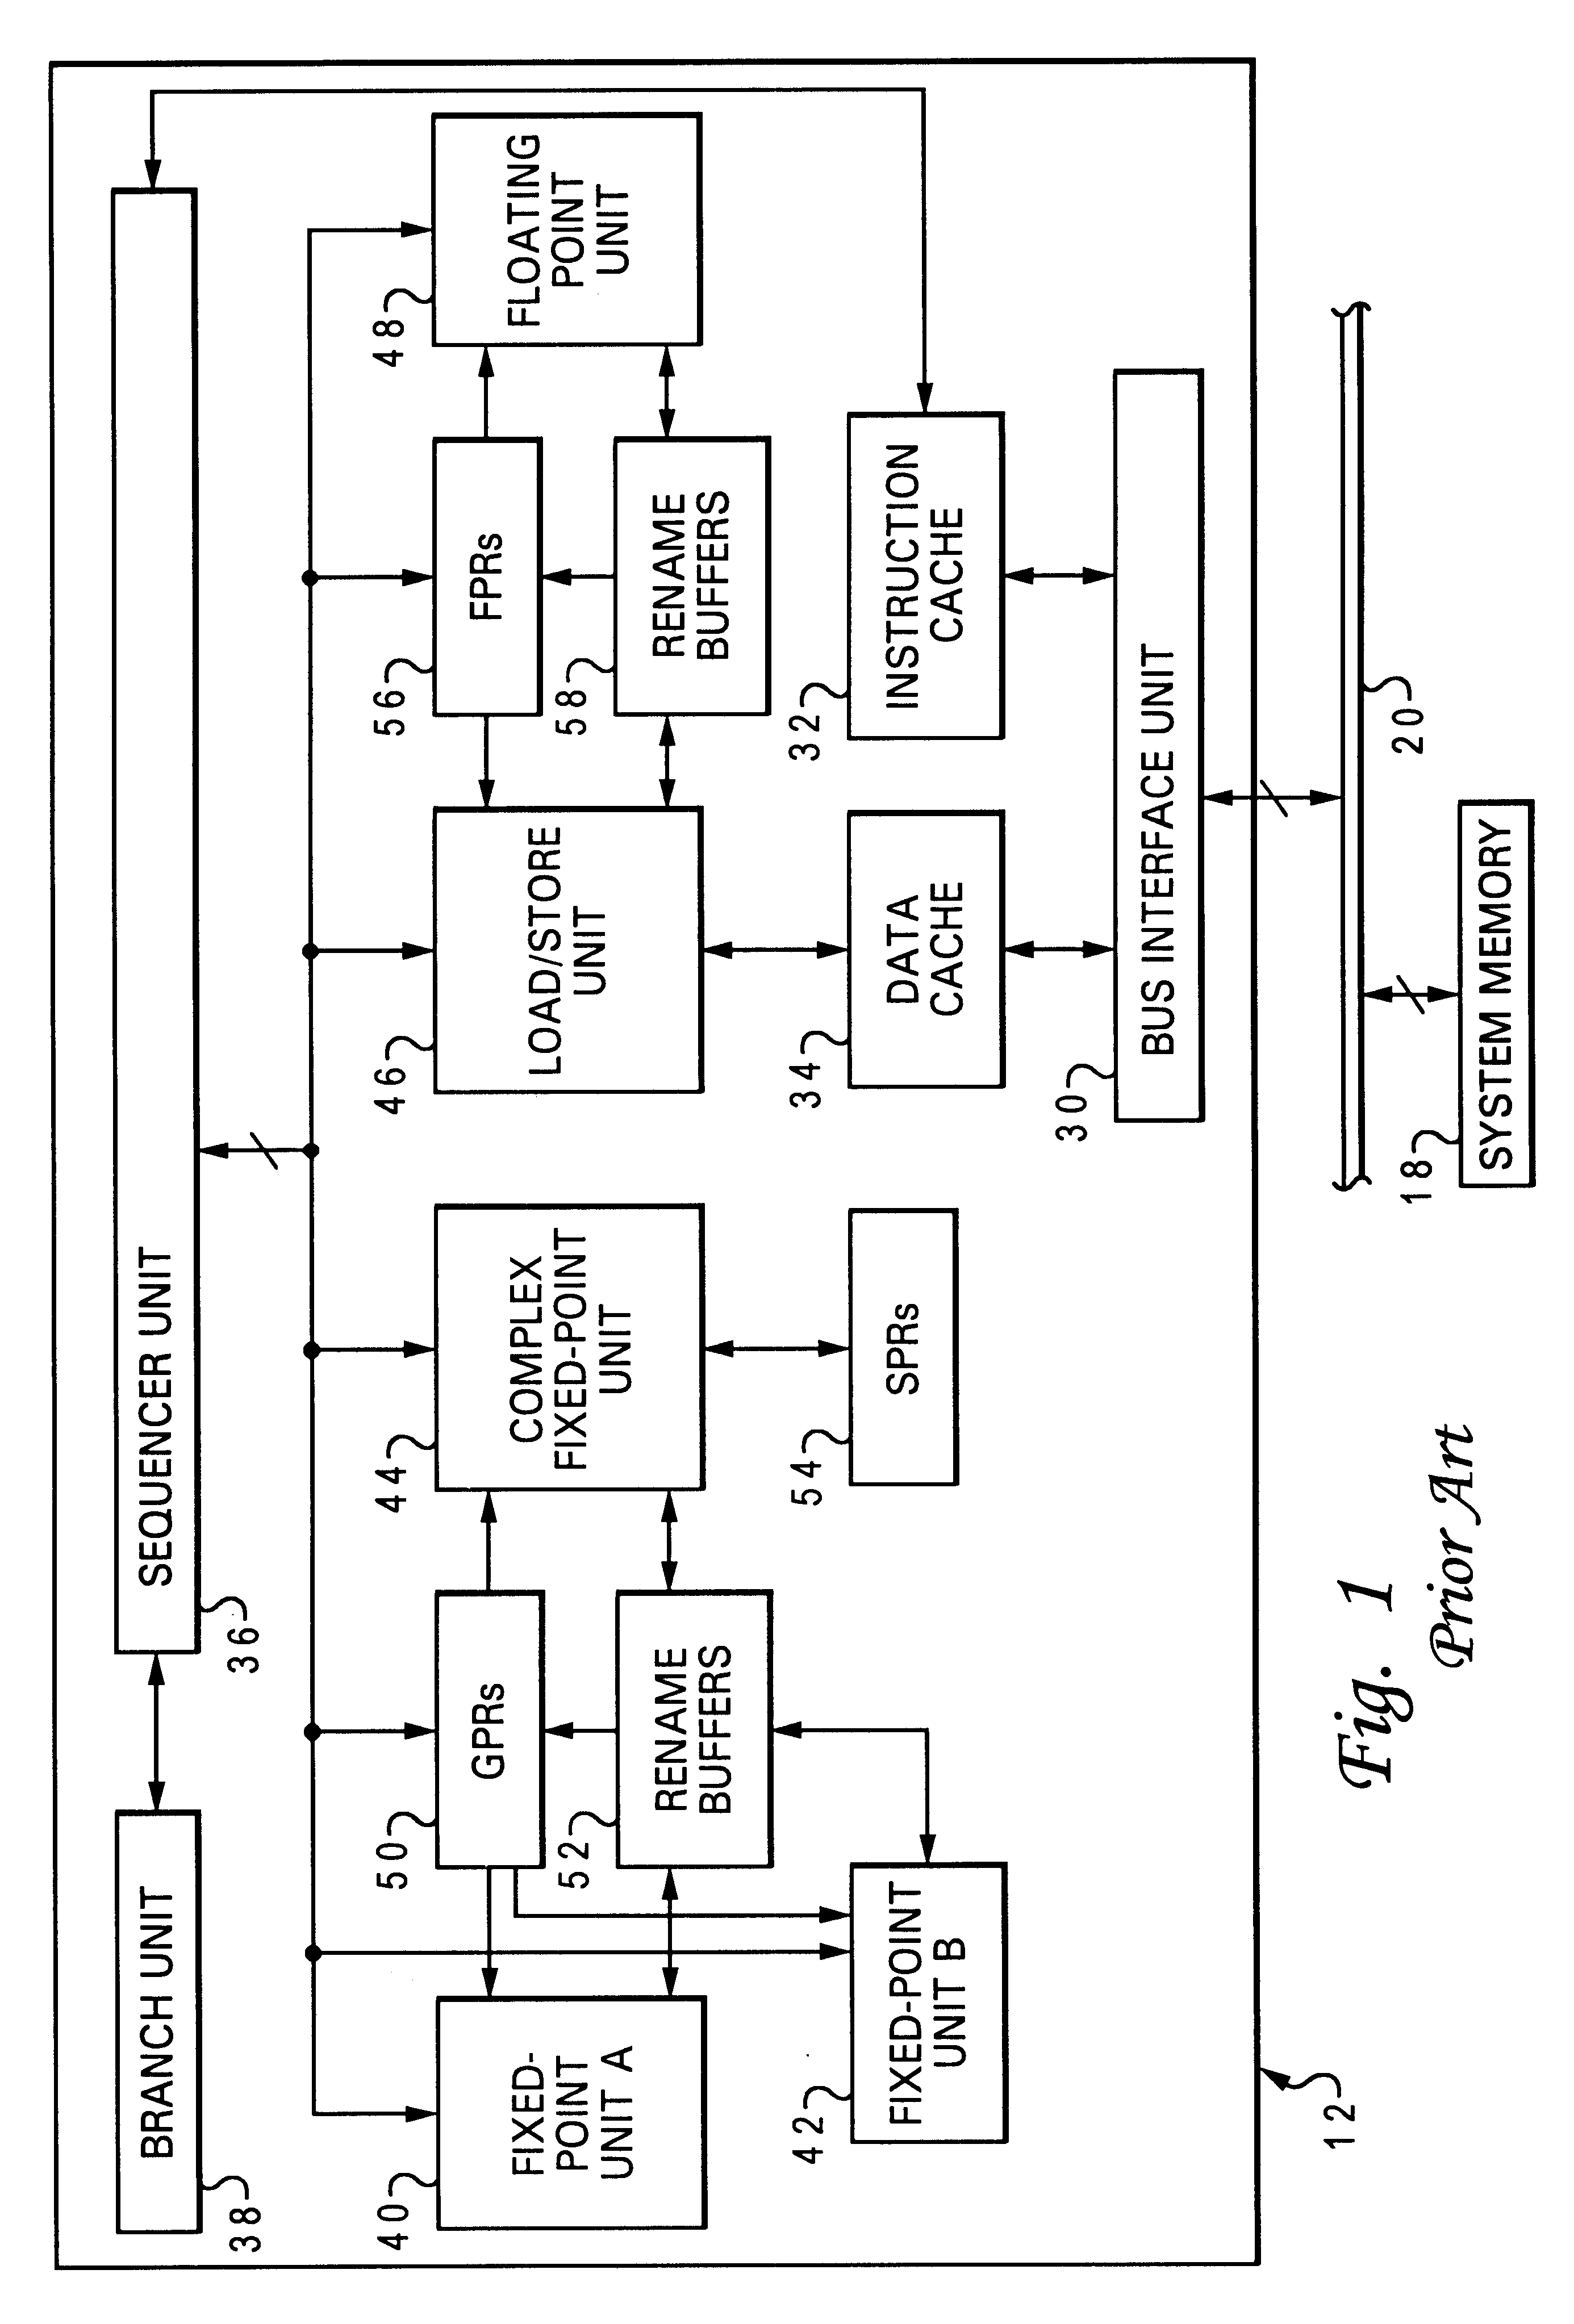 Integrated cache and directory structure for multi-level caches